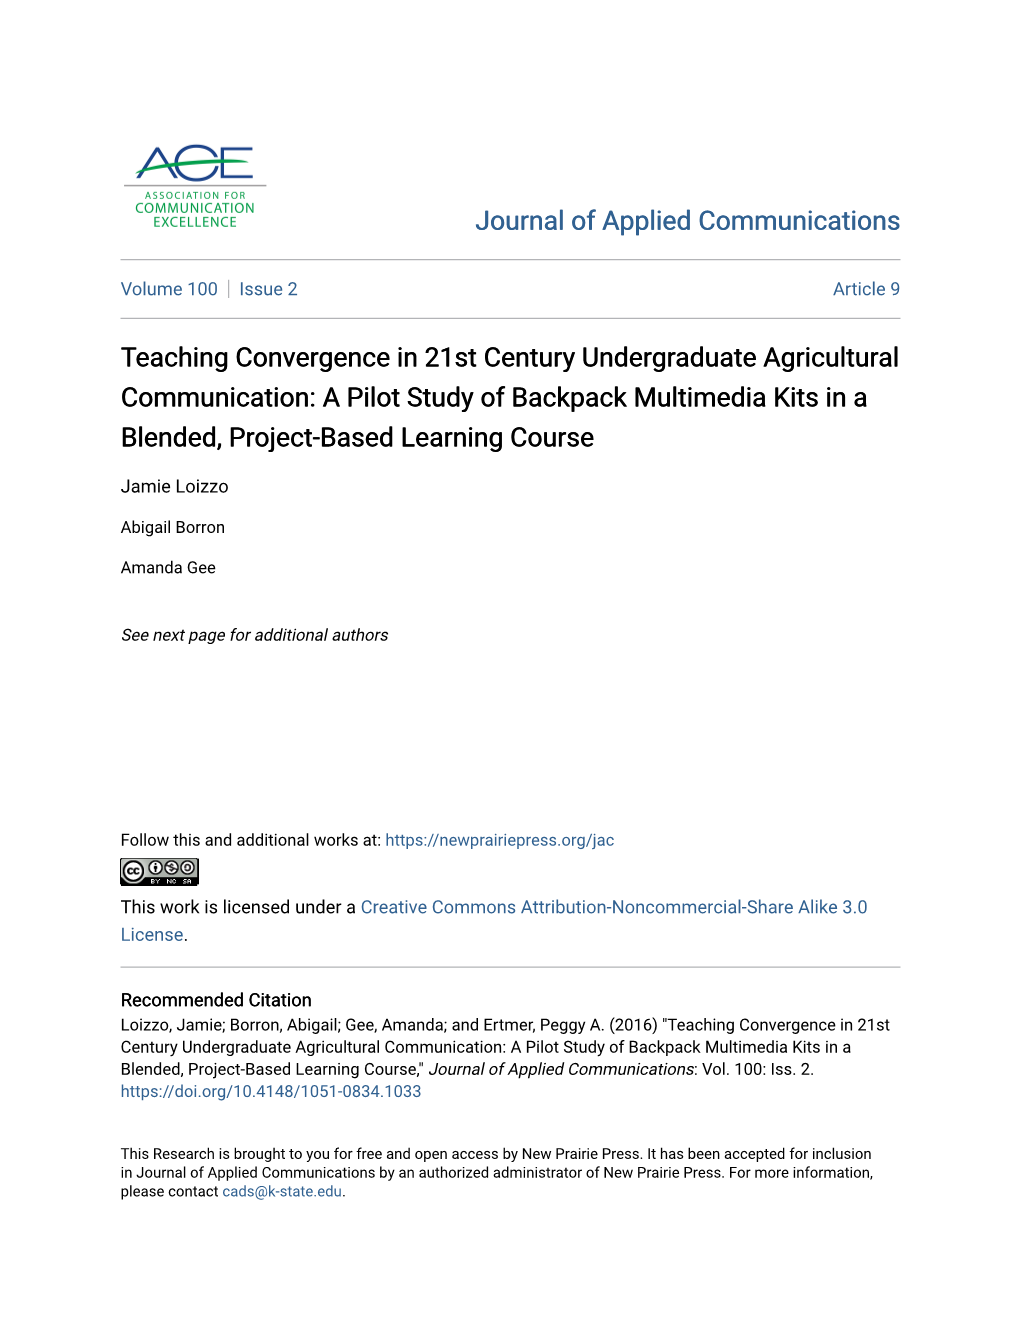 Teaching Convergence in 21St Century Undergraduate Agricultural Communication: a Pilot Study of Backpack Multimedia Kits in a Blended, Project-Based Learning Course